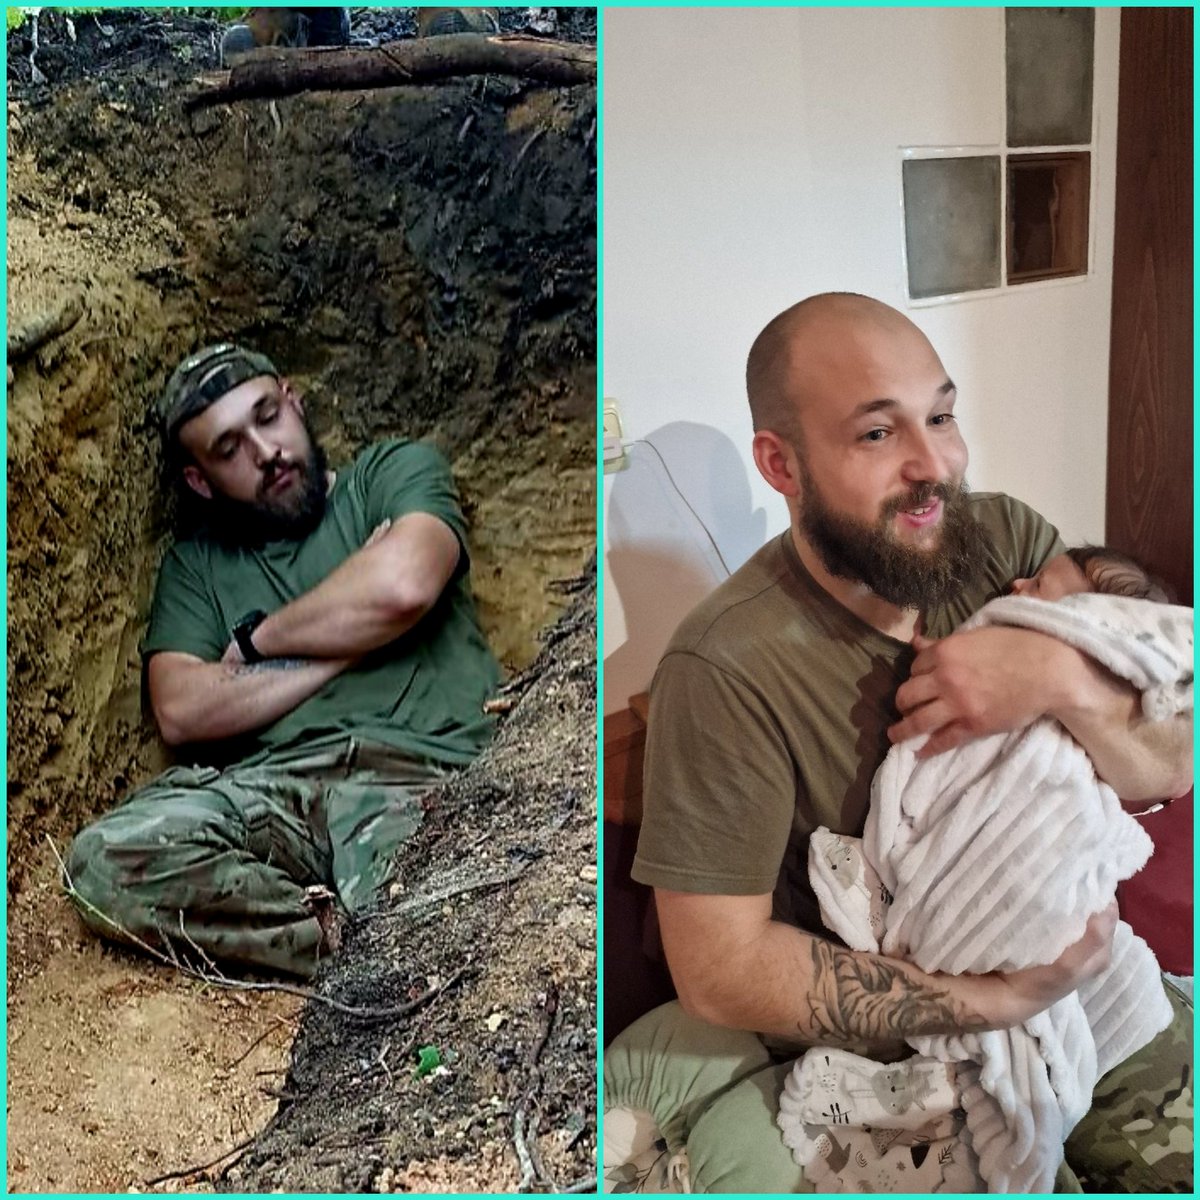 Pictured on the left is Misha, the Ukrainian soldier of Romanian origin, exhausted and taking a short nap after a day of digging trenches. It was somewhere around the summer of 2022. In the picture on the right is him again, with his newborn baby girl in early 2023. What are…